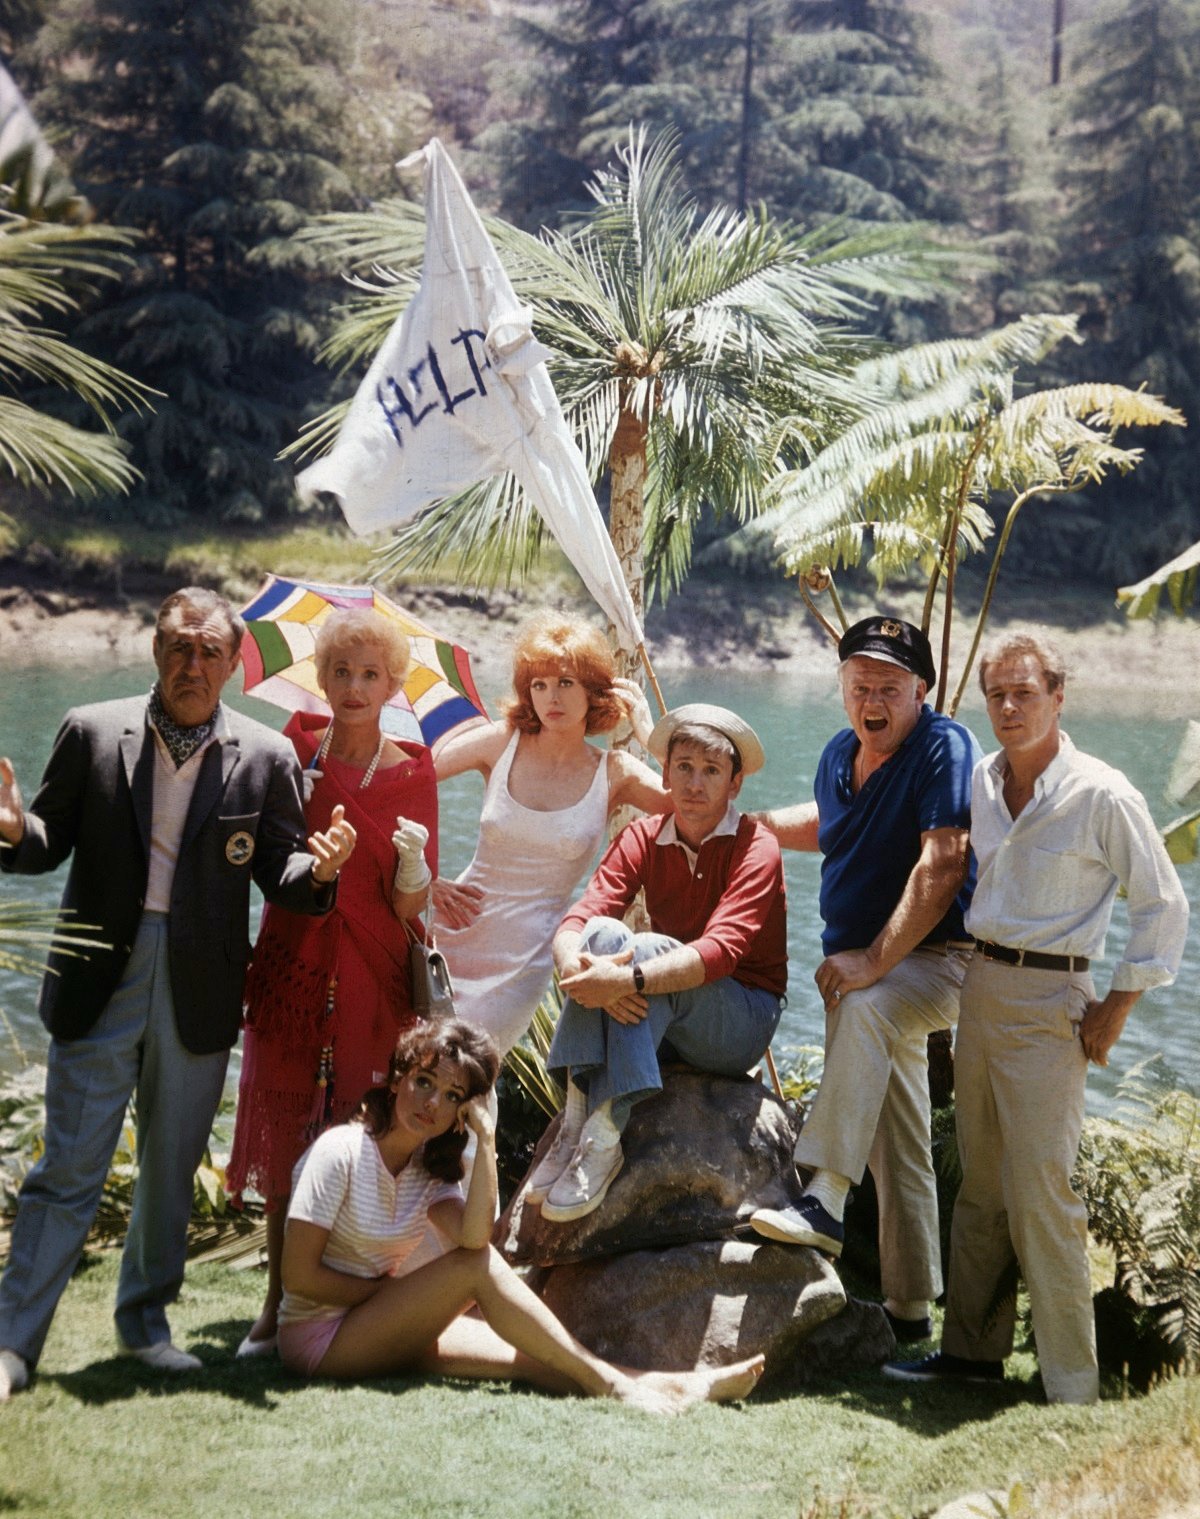 The cast of 'Gilligan's Island' pose together on set of the CBS sitcom.